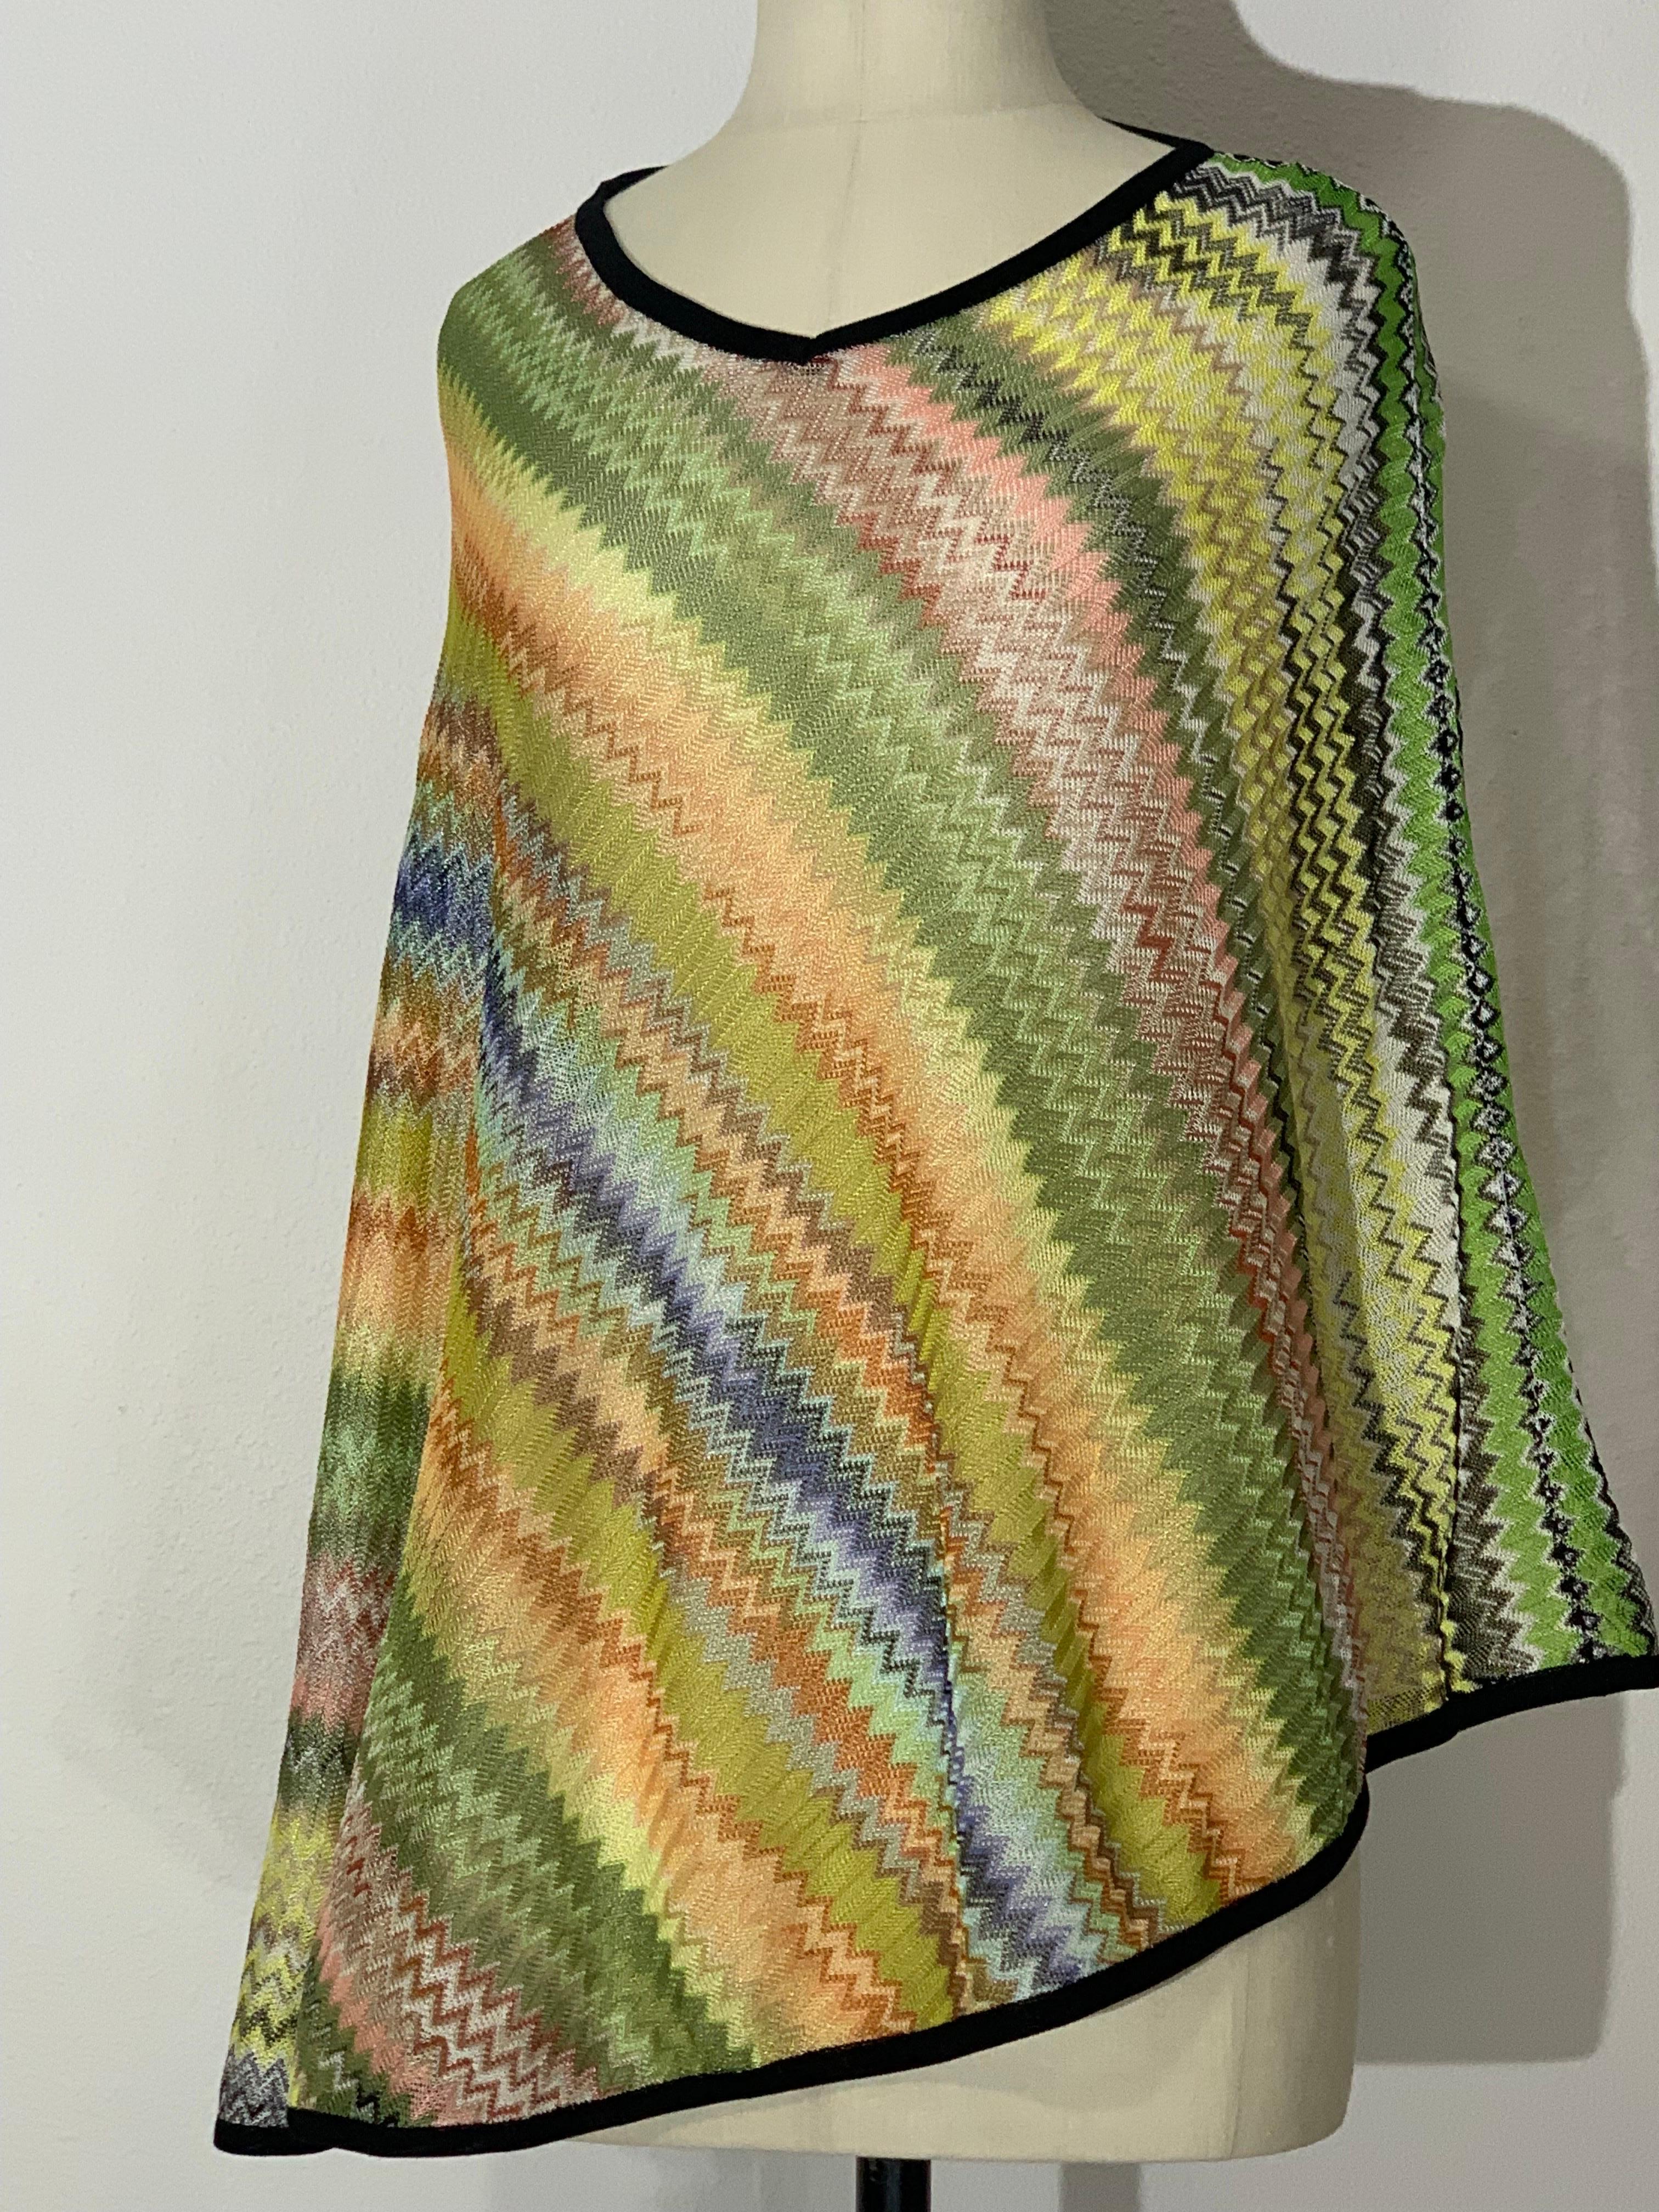 Missoni Spring/Summer Rayon & Cotton Knit Cover-Up in Classic Missoni Zig-Zag In Excellent Condition For Sale In Gresham, OR